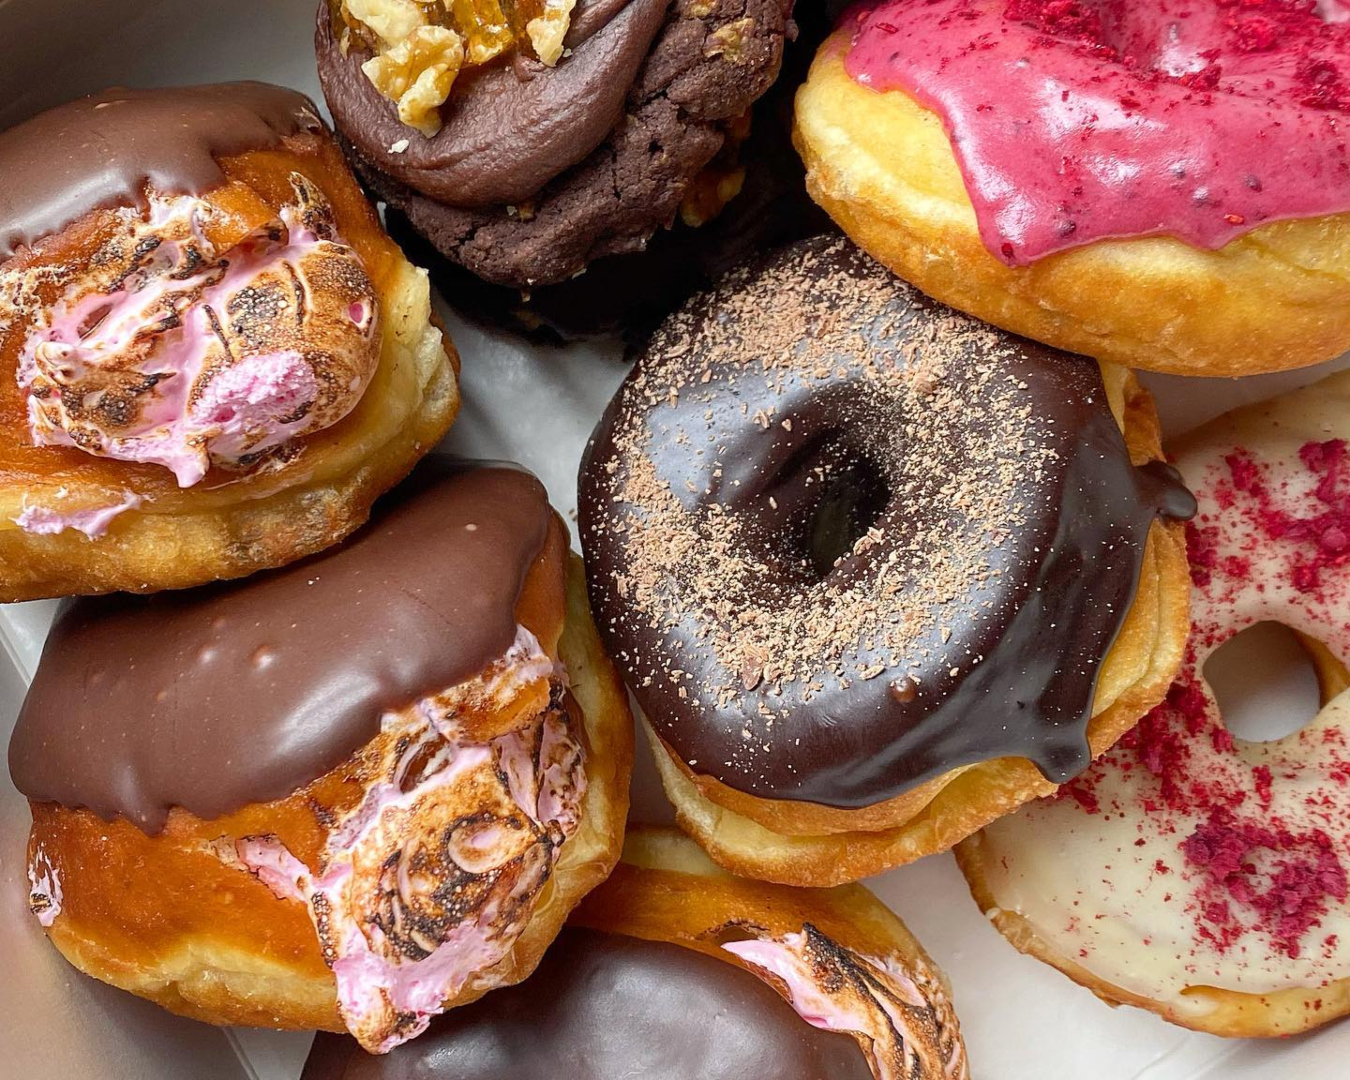 A selection of delicious donuts from DOE Donuts.